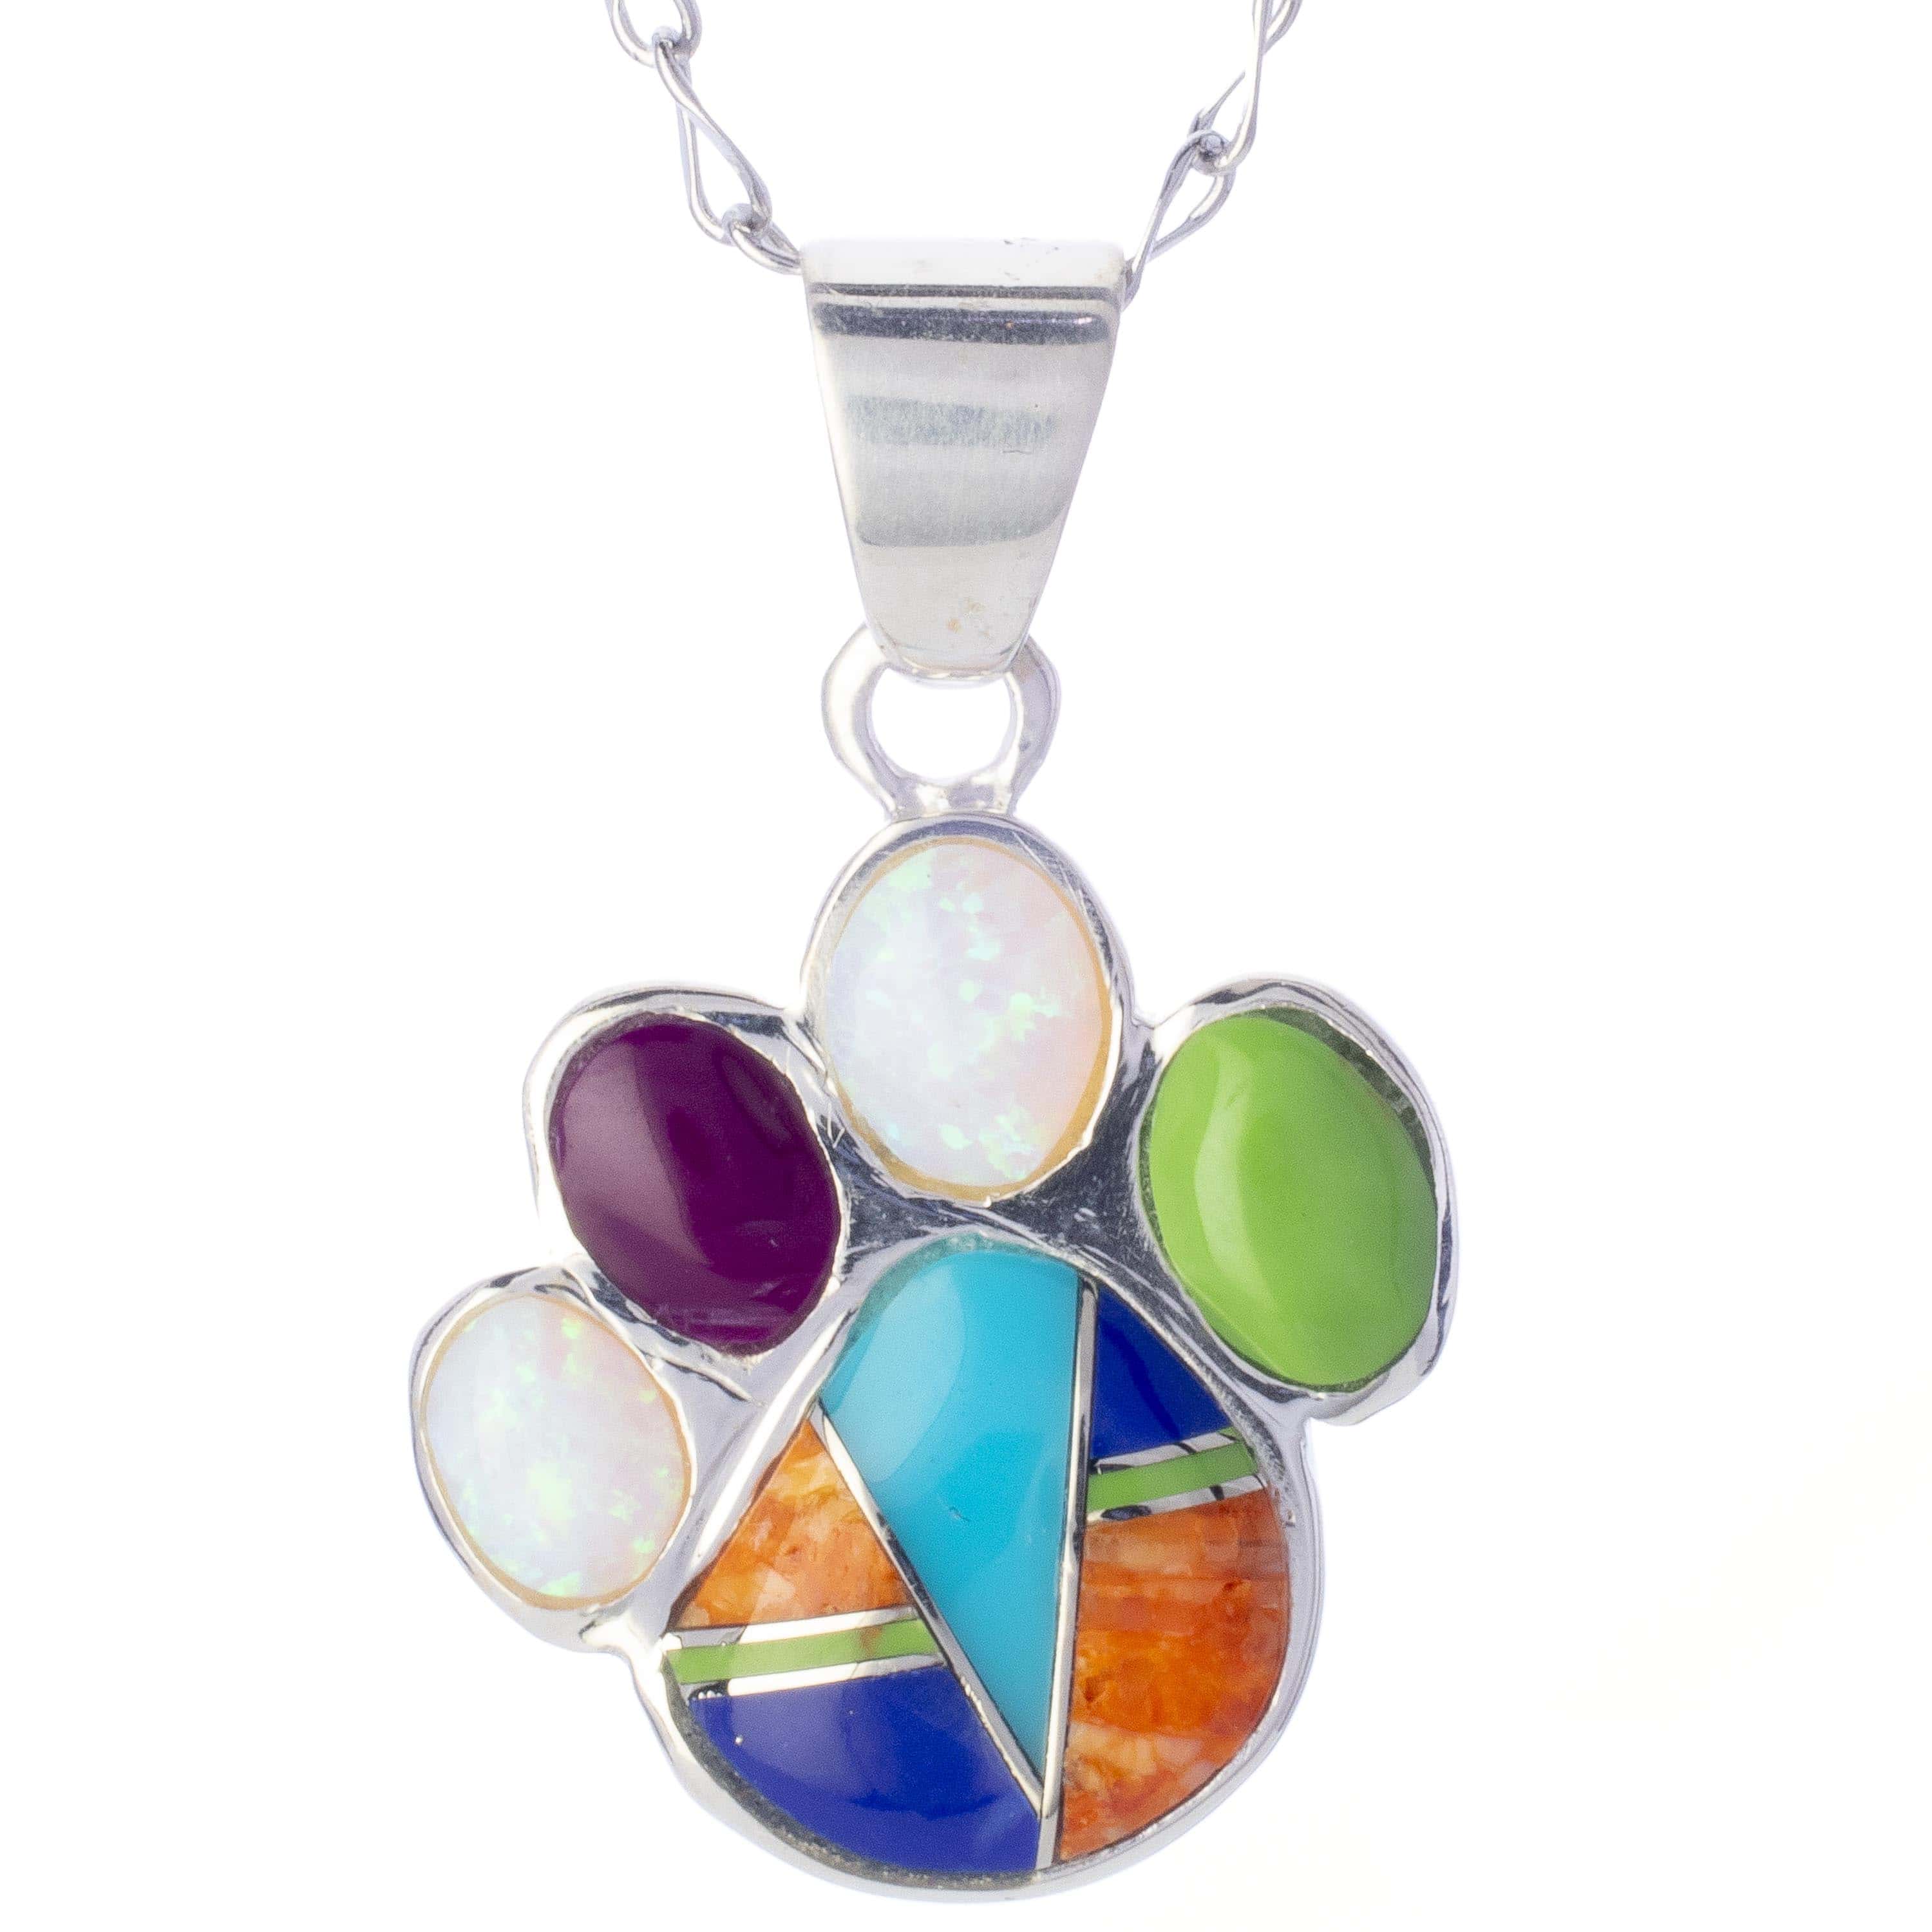 Kalifano Southwest Silver Jewelry Multi Gemstone Dog Paw 925 Sterling Silver Pendant USA Handmade with Opal Accent NMN.2364.MT